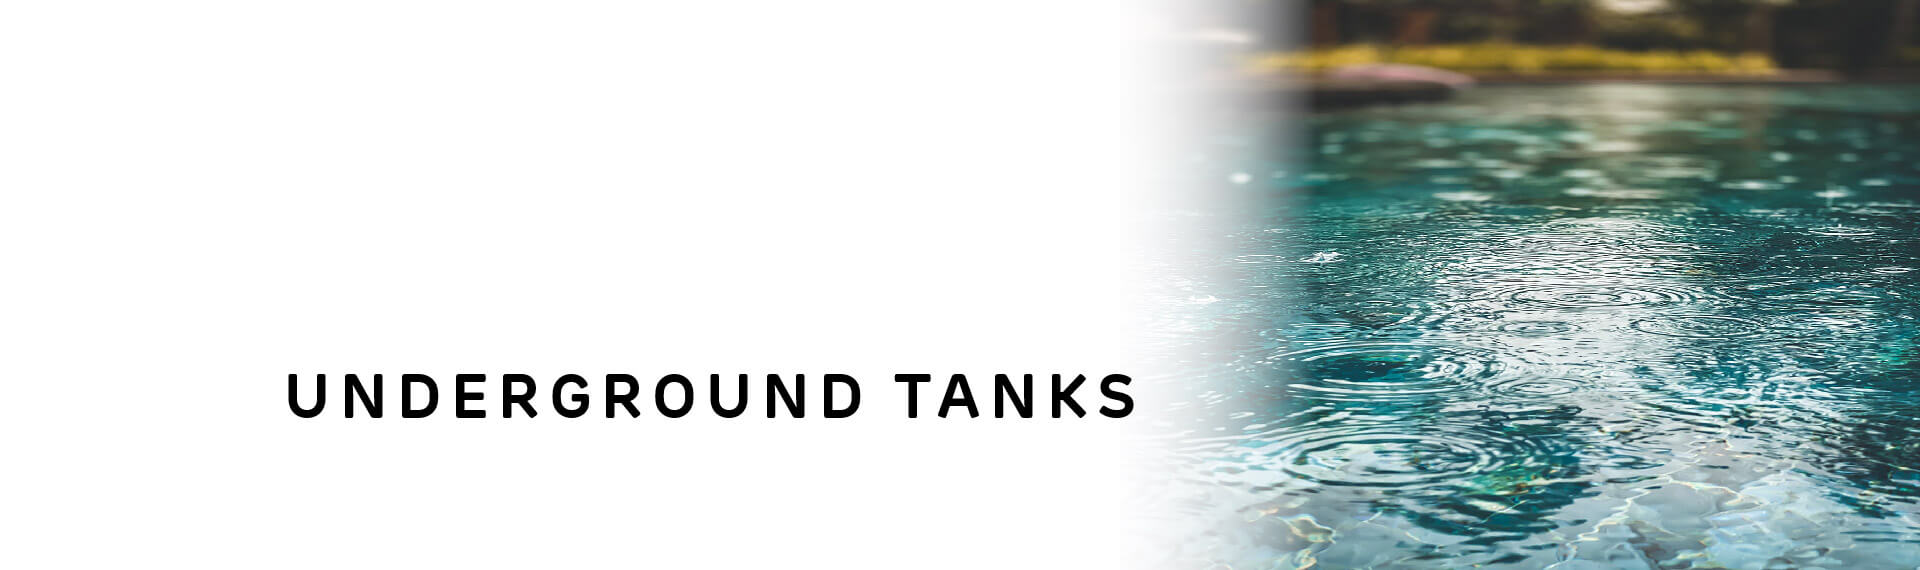 Header image with “Underground Tanks” in capital letters; with a close-up photo of rain drops falling into a clear blue lake.